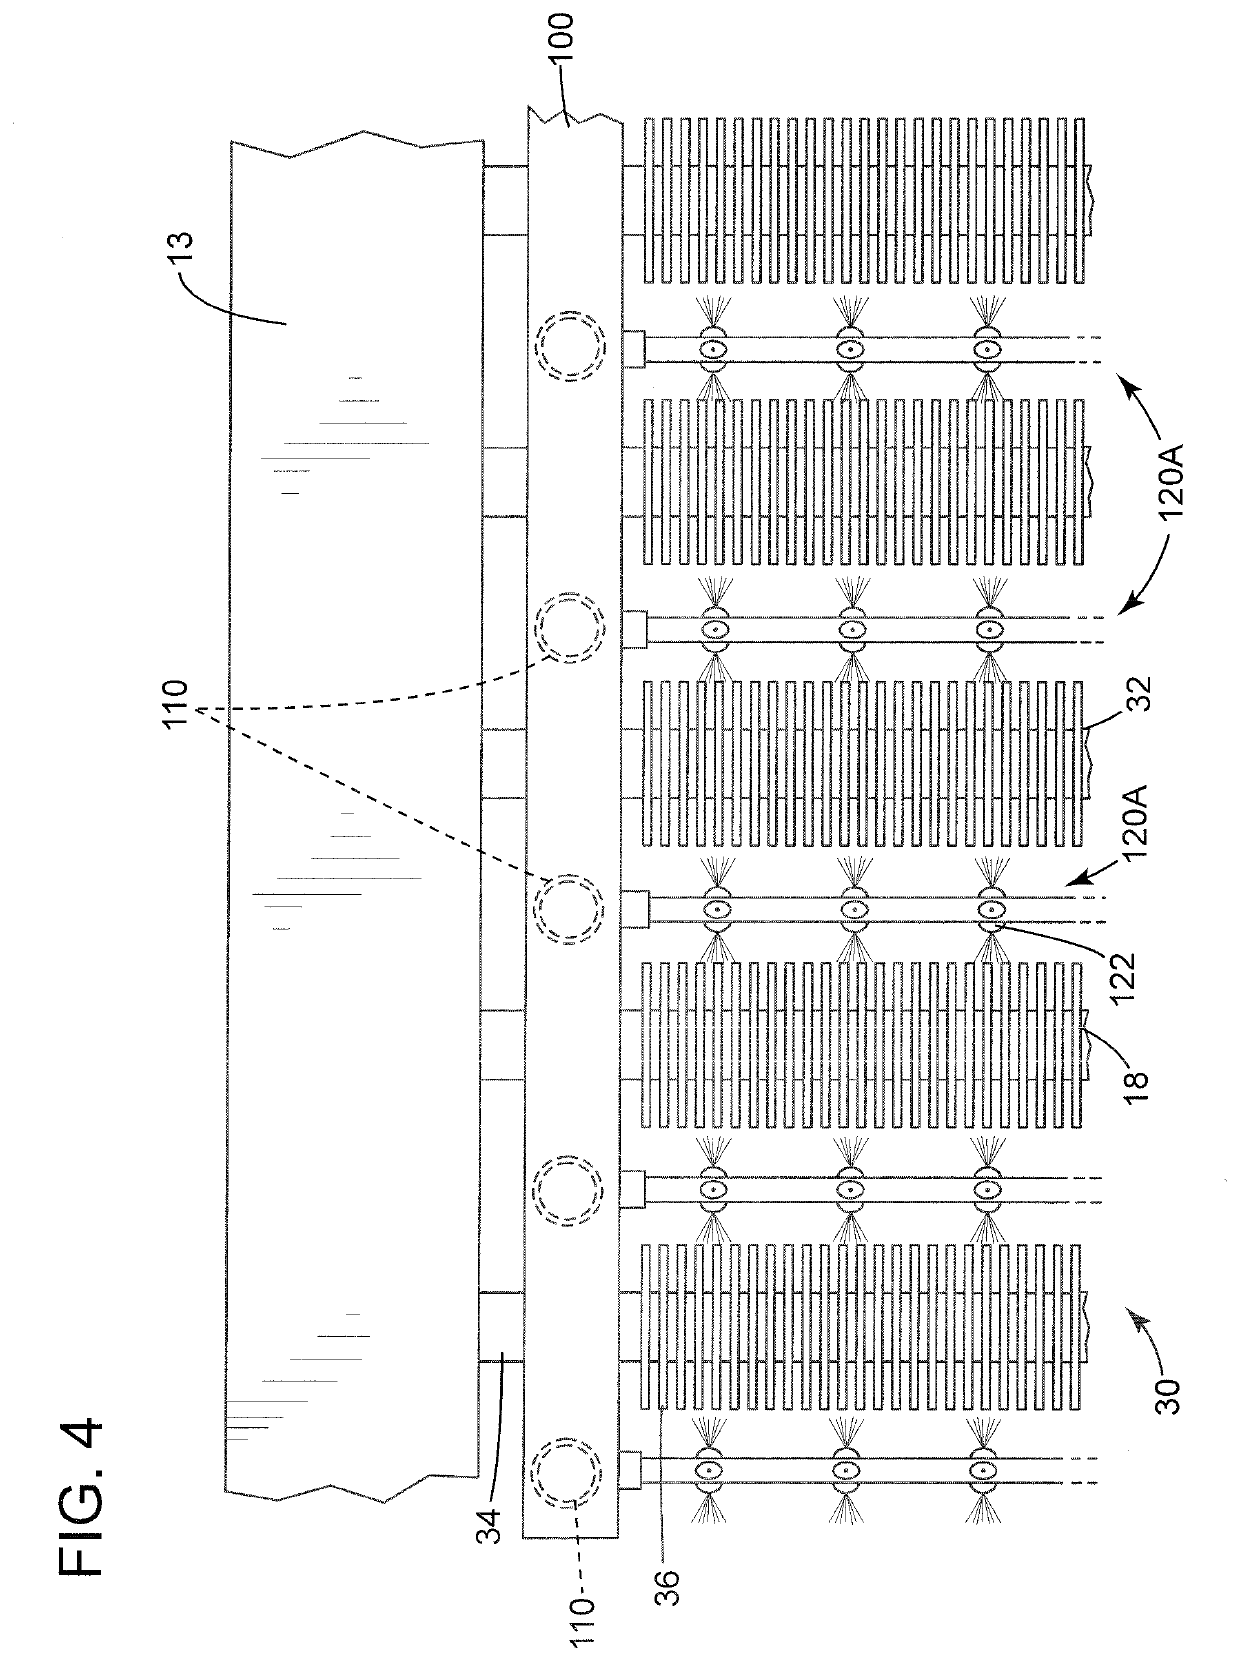 Air- cooled heat exchanger cleaning and temperature control apparatus and method